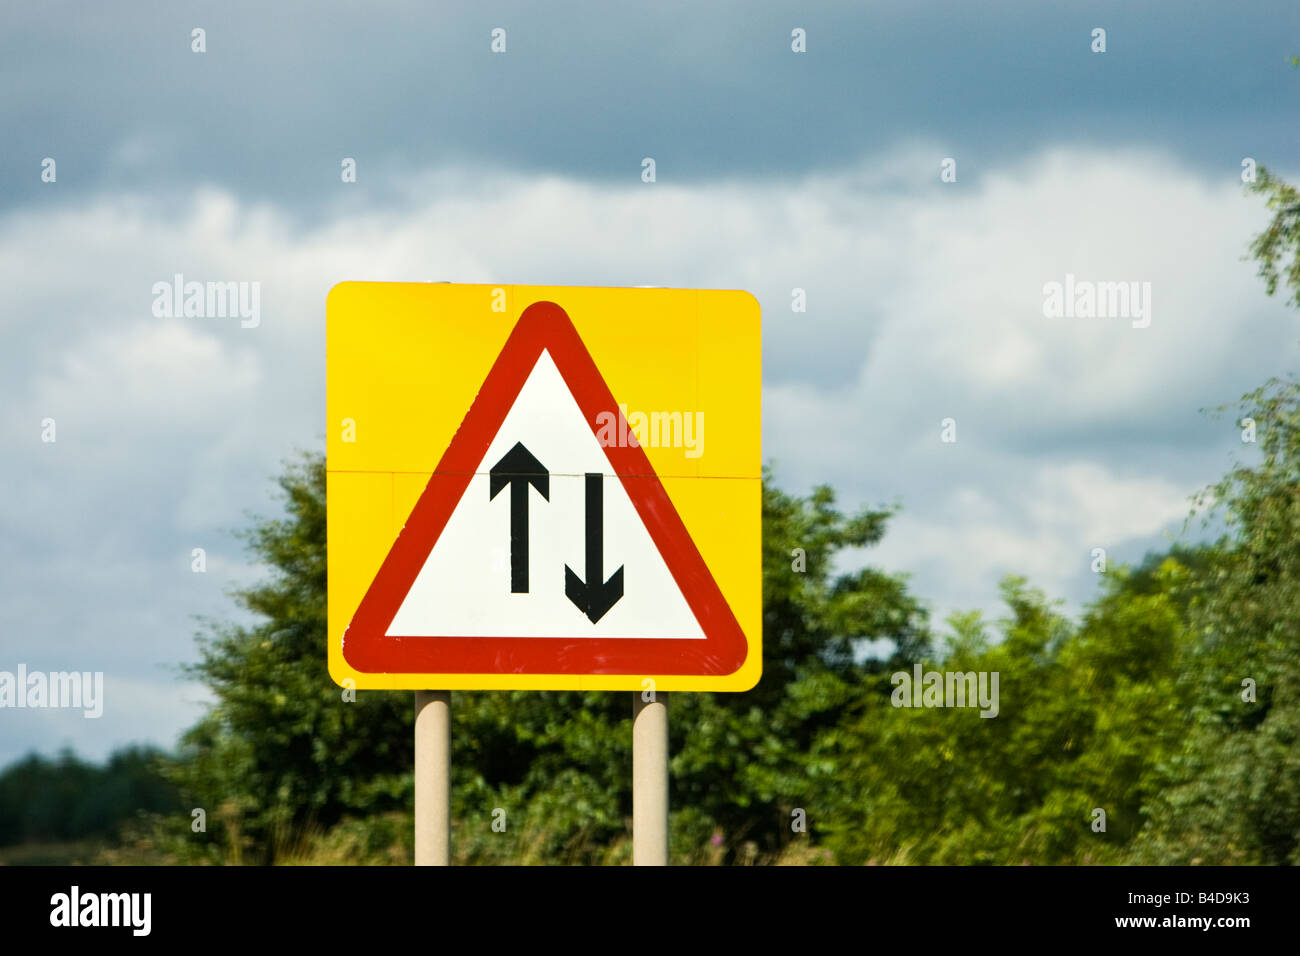 Road sign warning of two way traffic straight ahead England UK Stock Photo